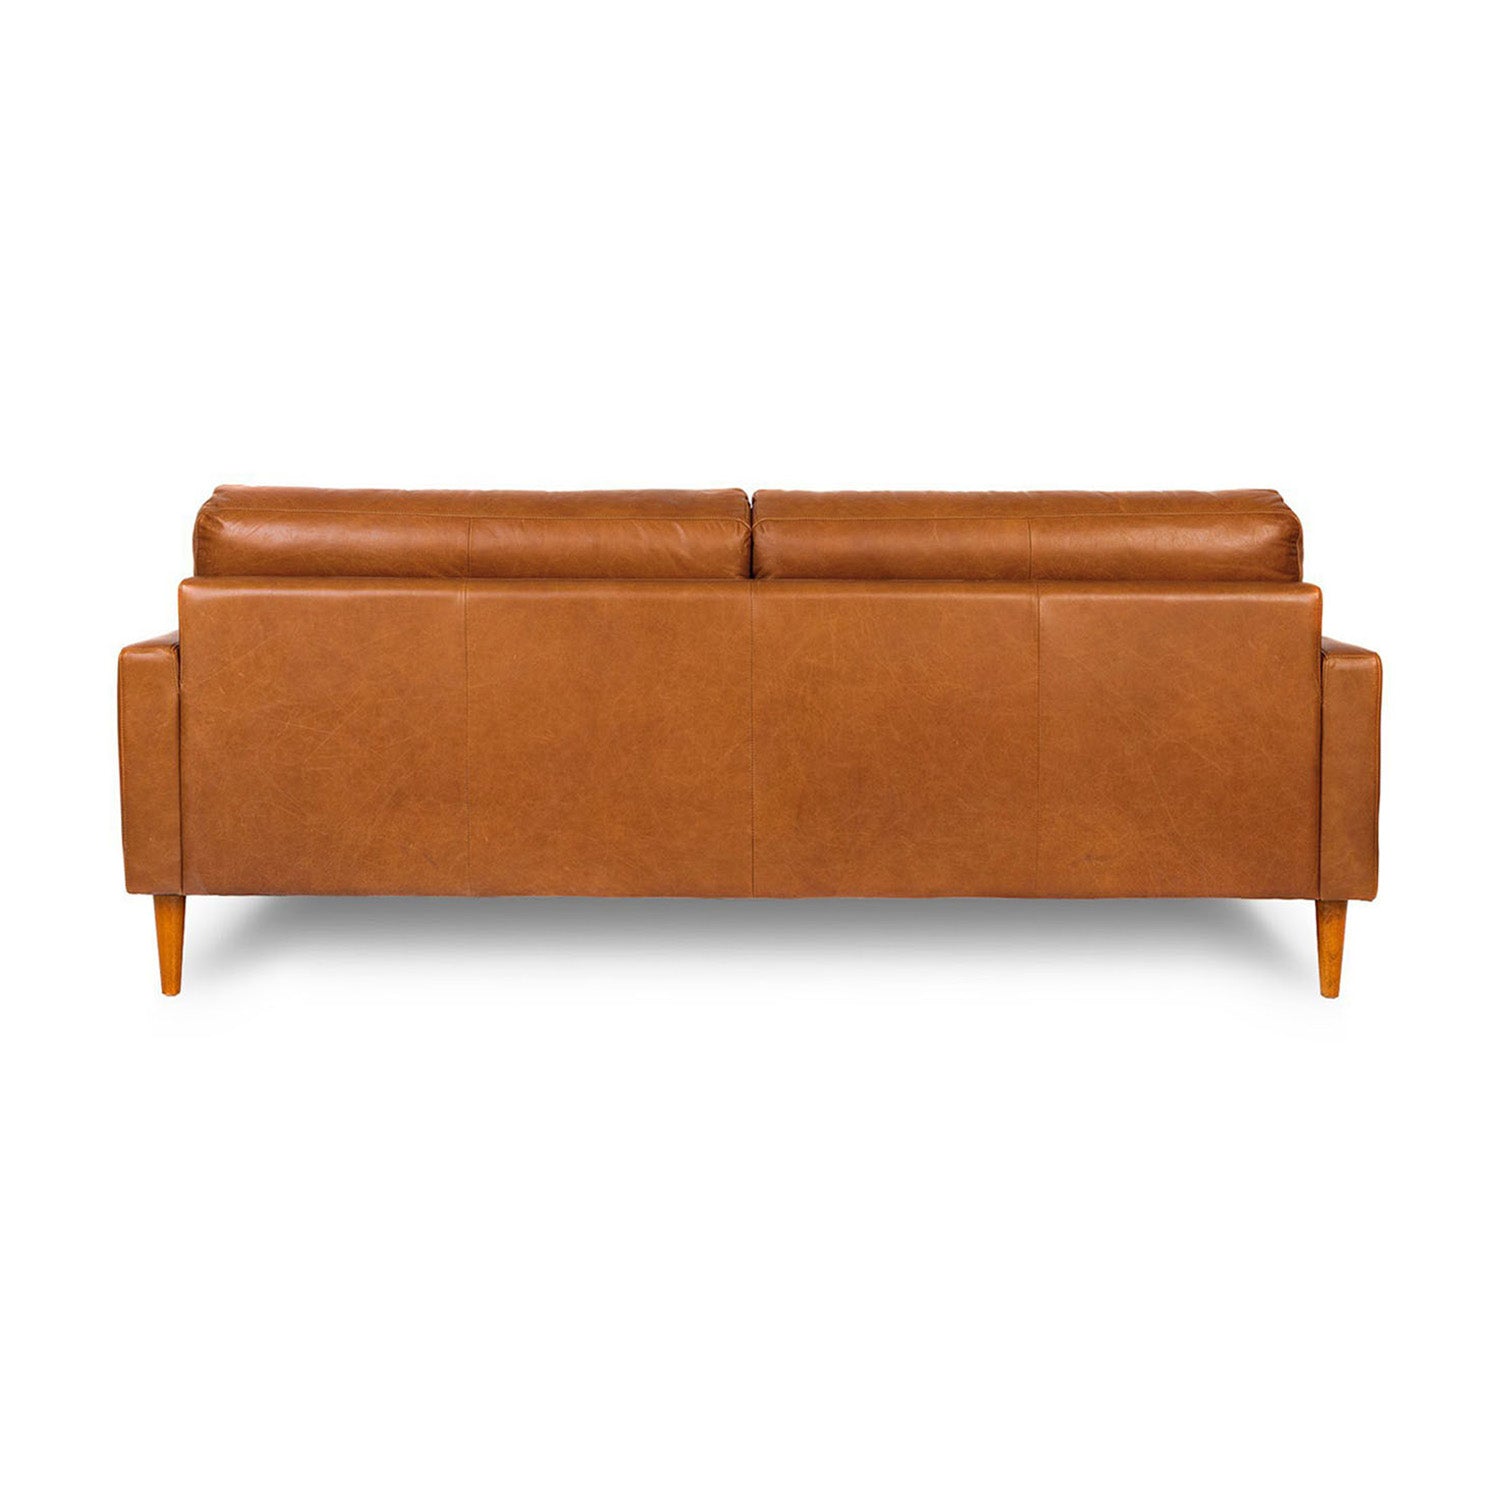 Classic Leather 3 Seat Sofa in Vintage Honey